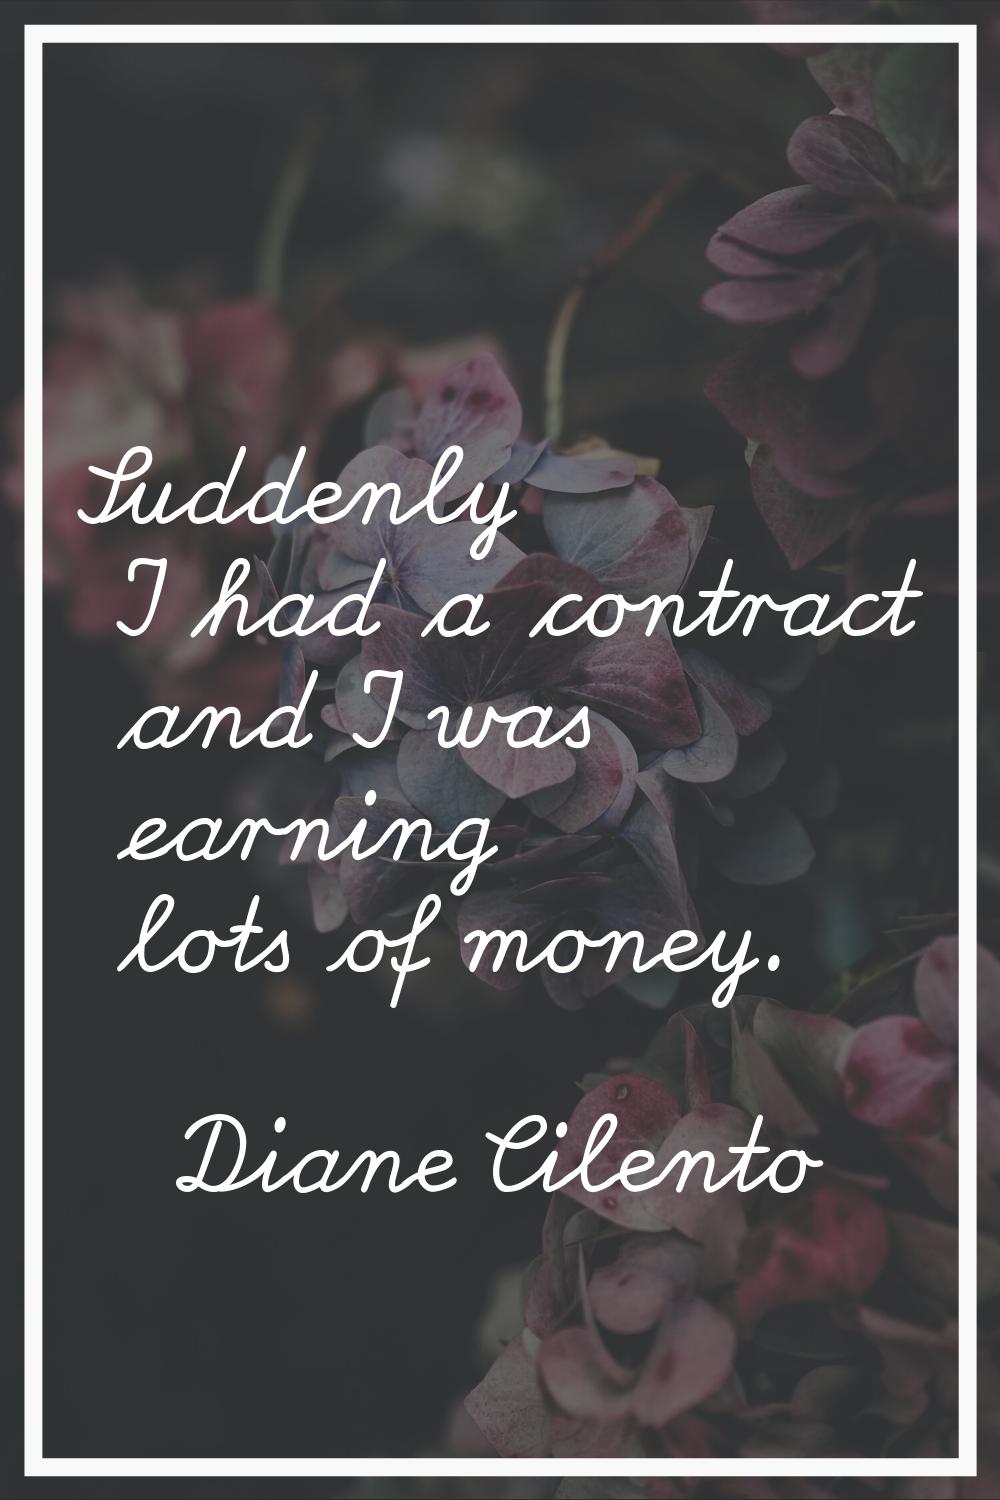 Suddenly I had a contract and I was earning lots of money.